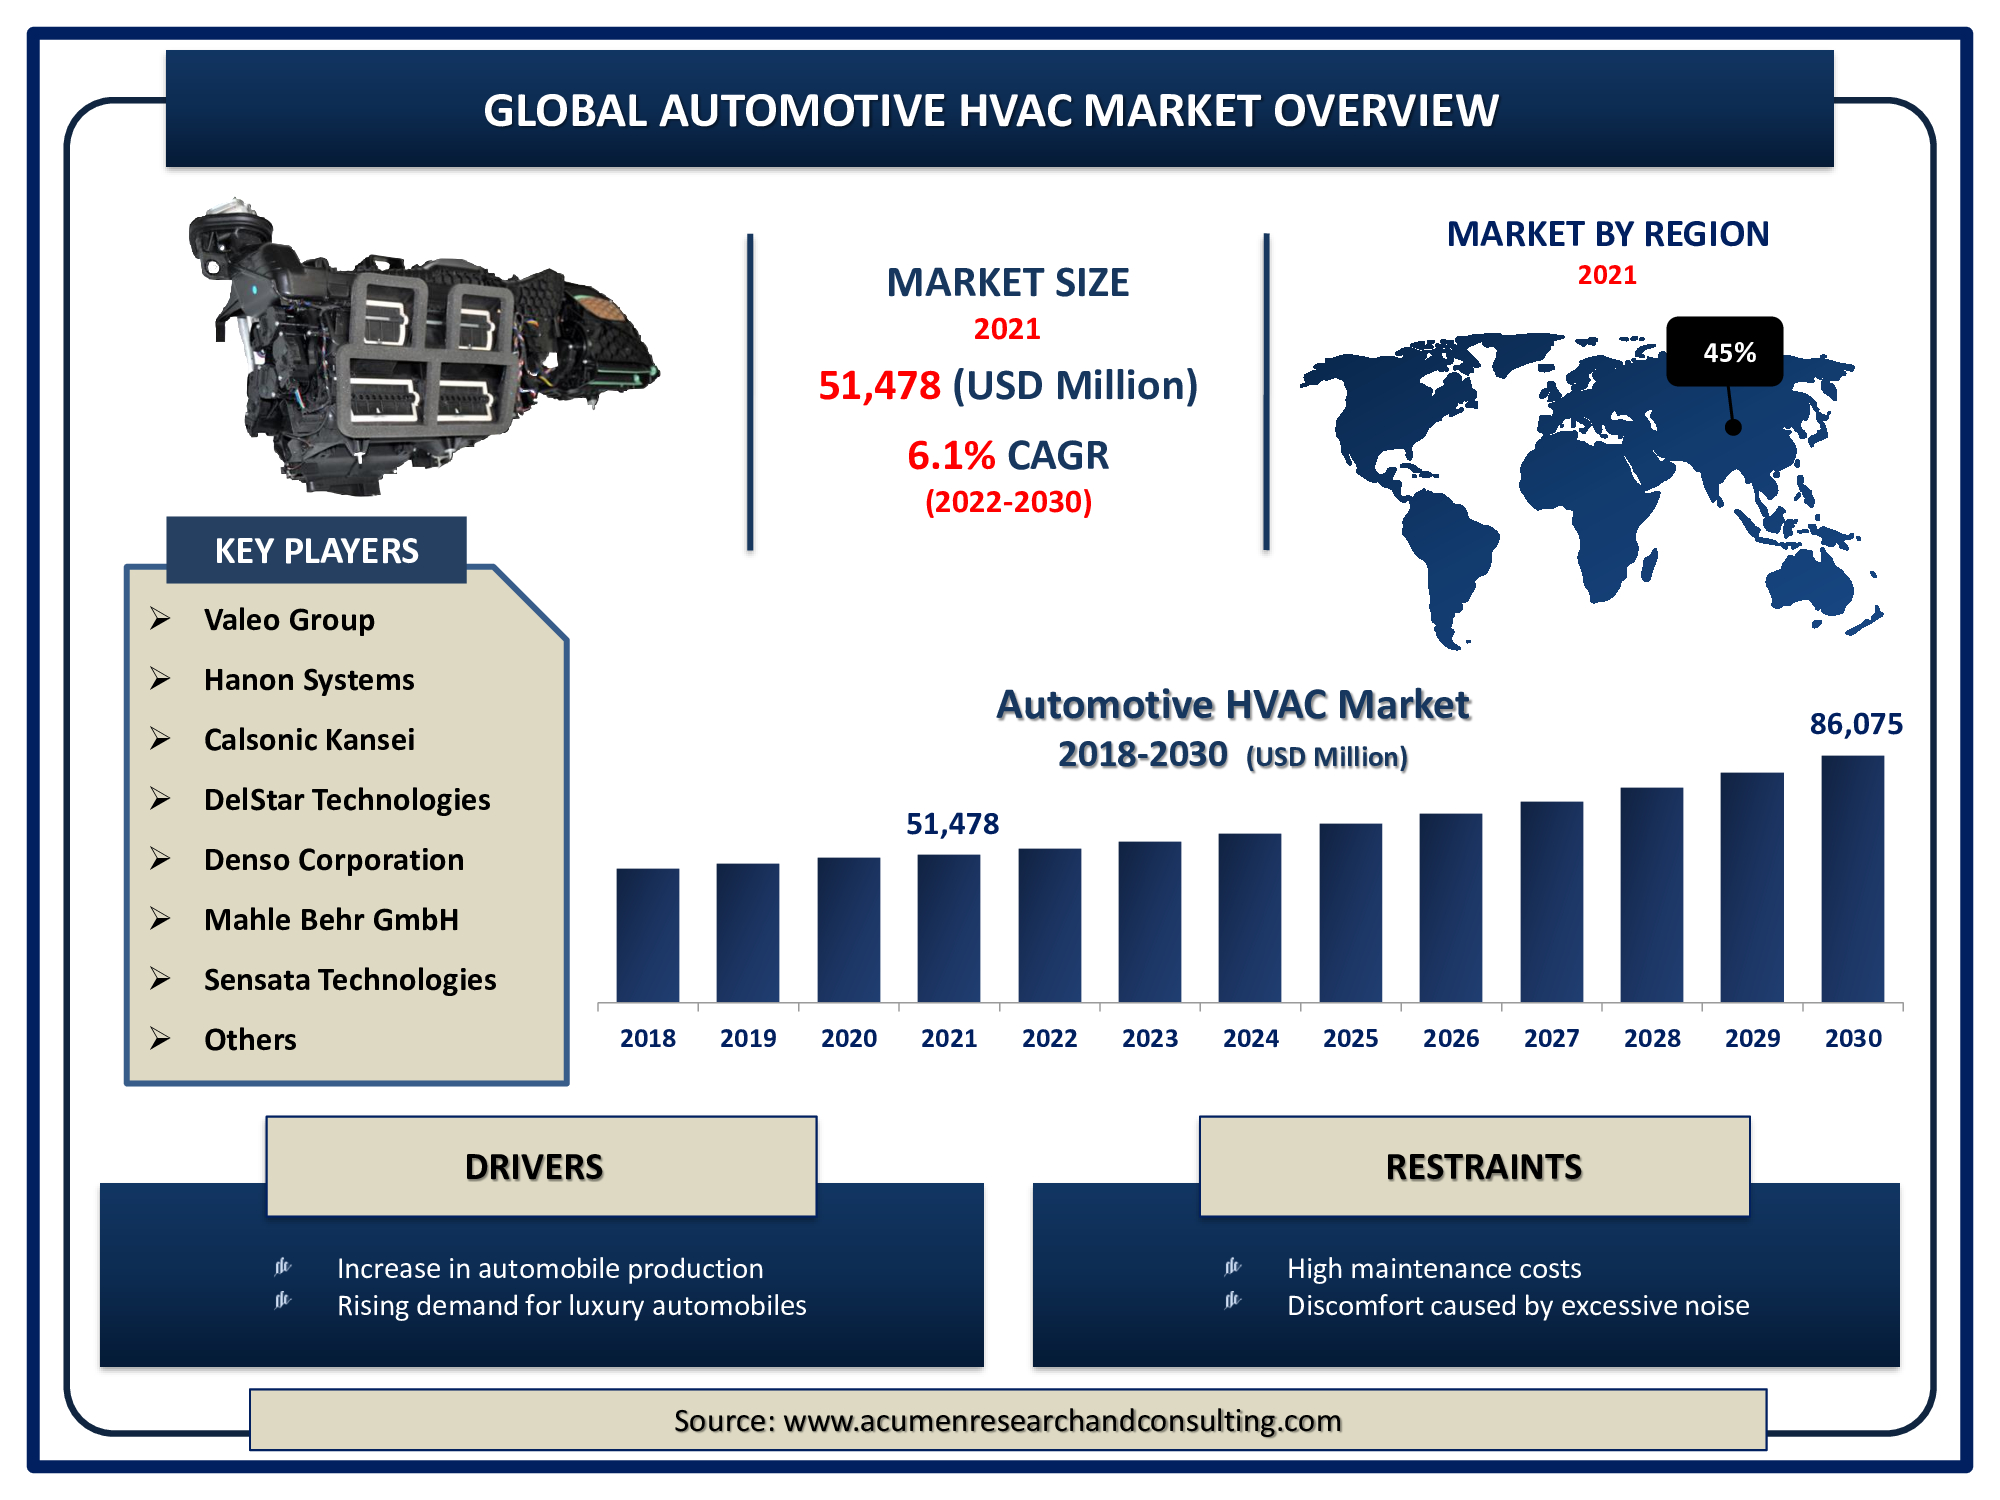 Global automotive HVAC market revenue is estimated to expand by USD 86,075 million by 2030, with a 6.1% CAGR from 2022 to 2030.